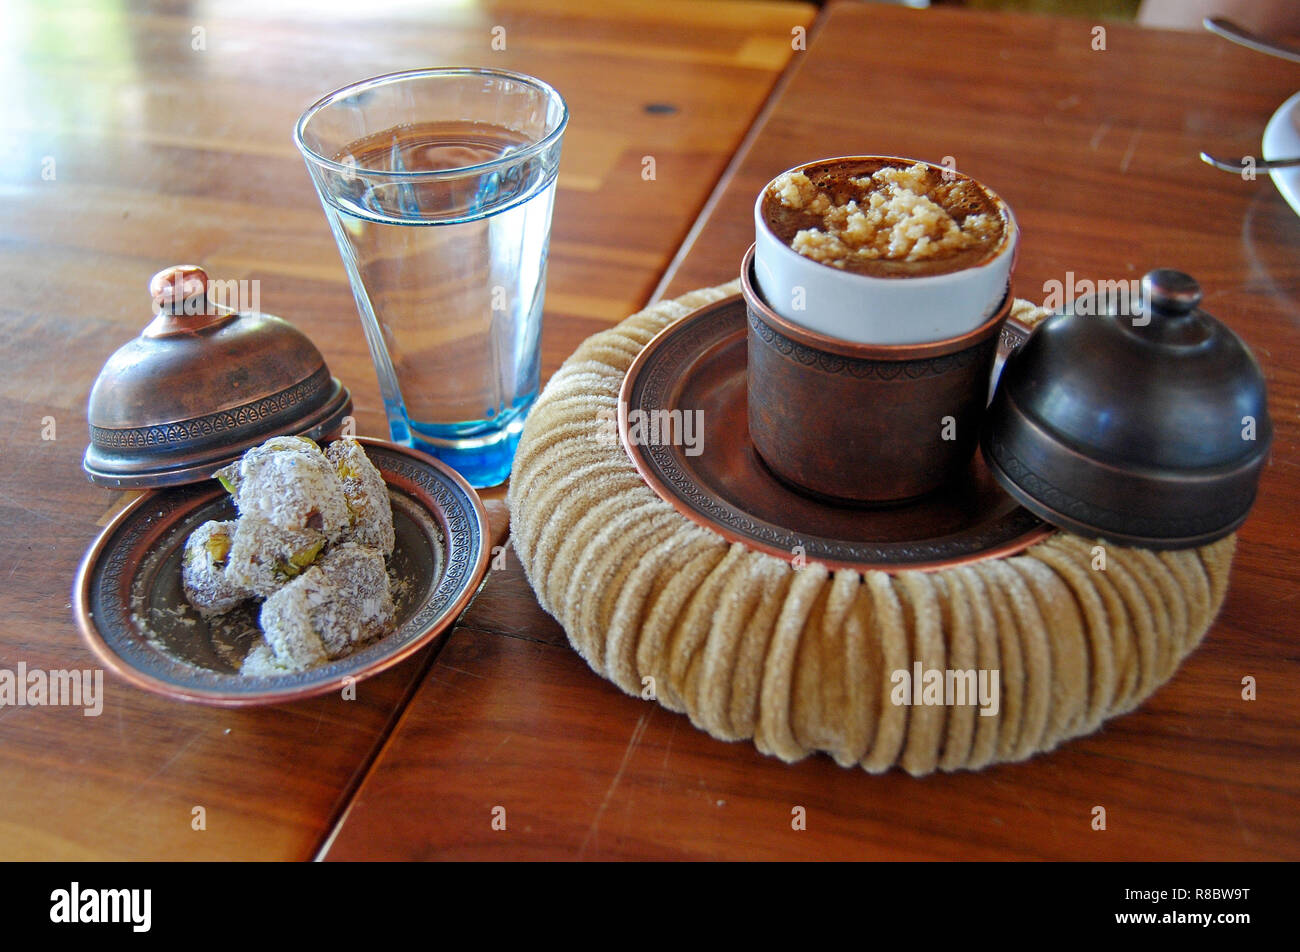 Turkish coffee with hazelnut served in a cup covered by a copper lid and set on a soft cupholder resembling a pasha hat. Stock Photo